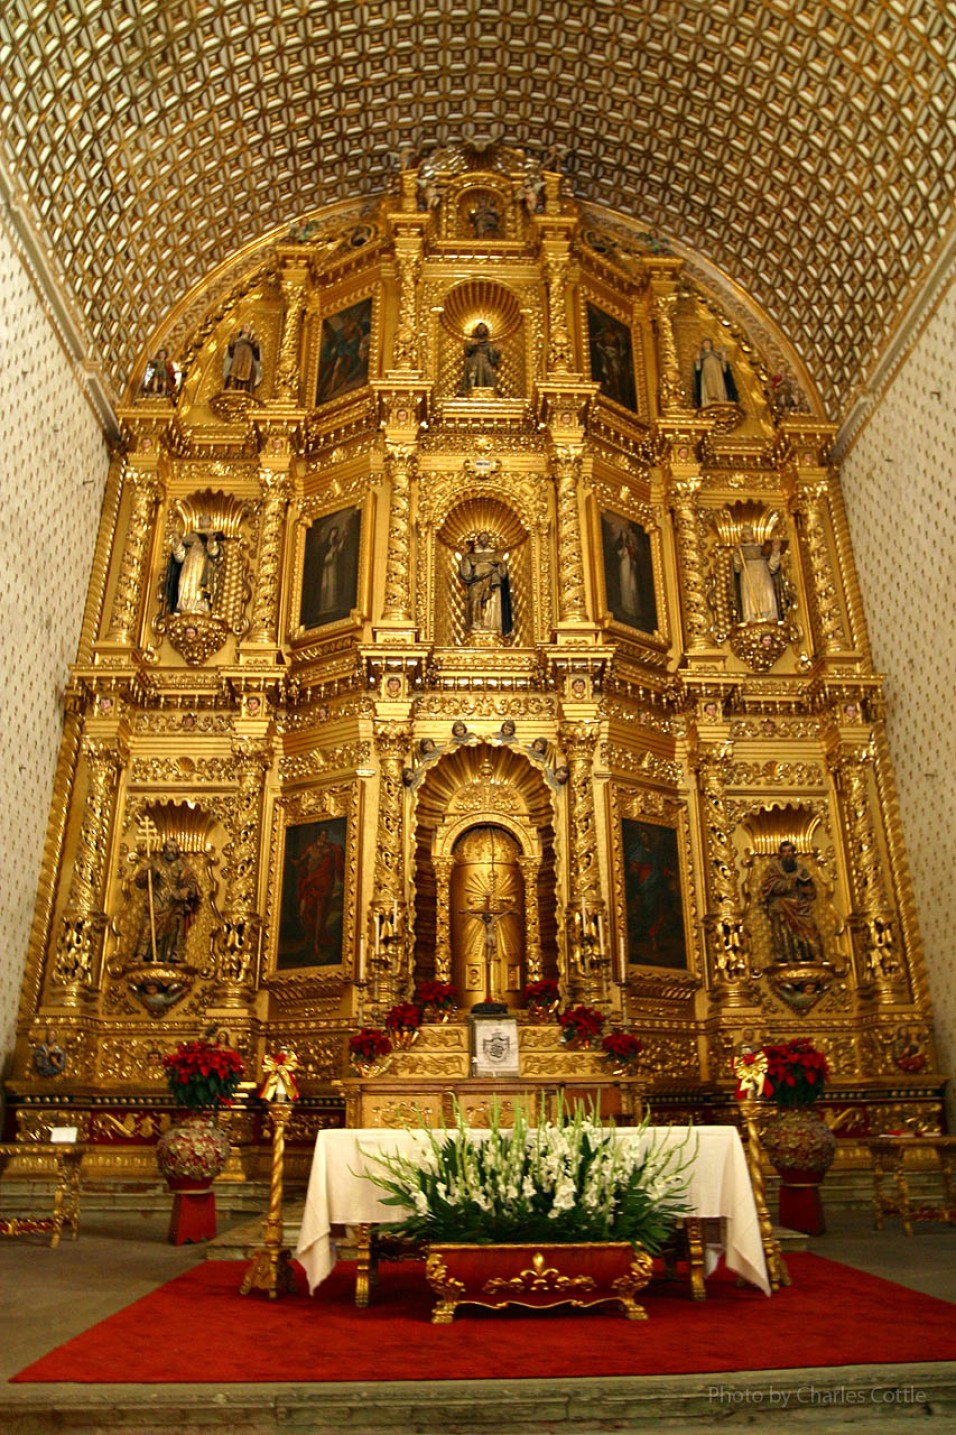 Ornate altar painted in gold plate from floor to ceiling